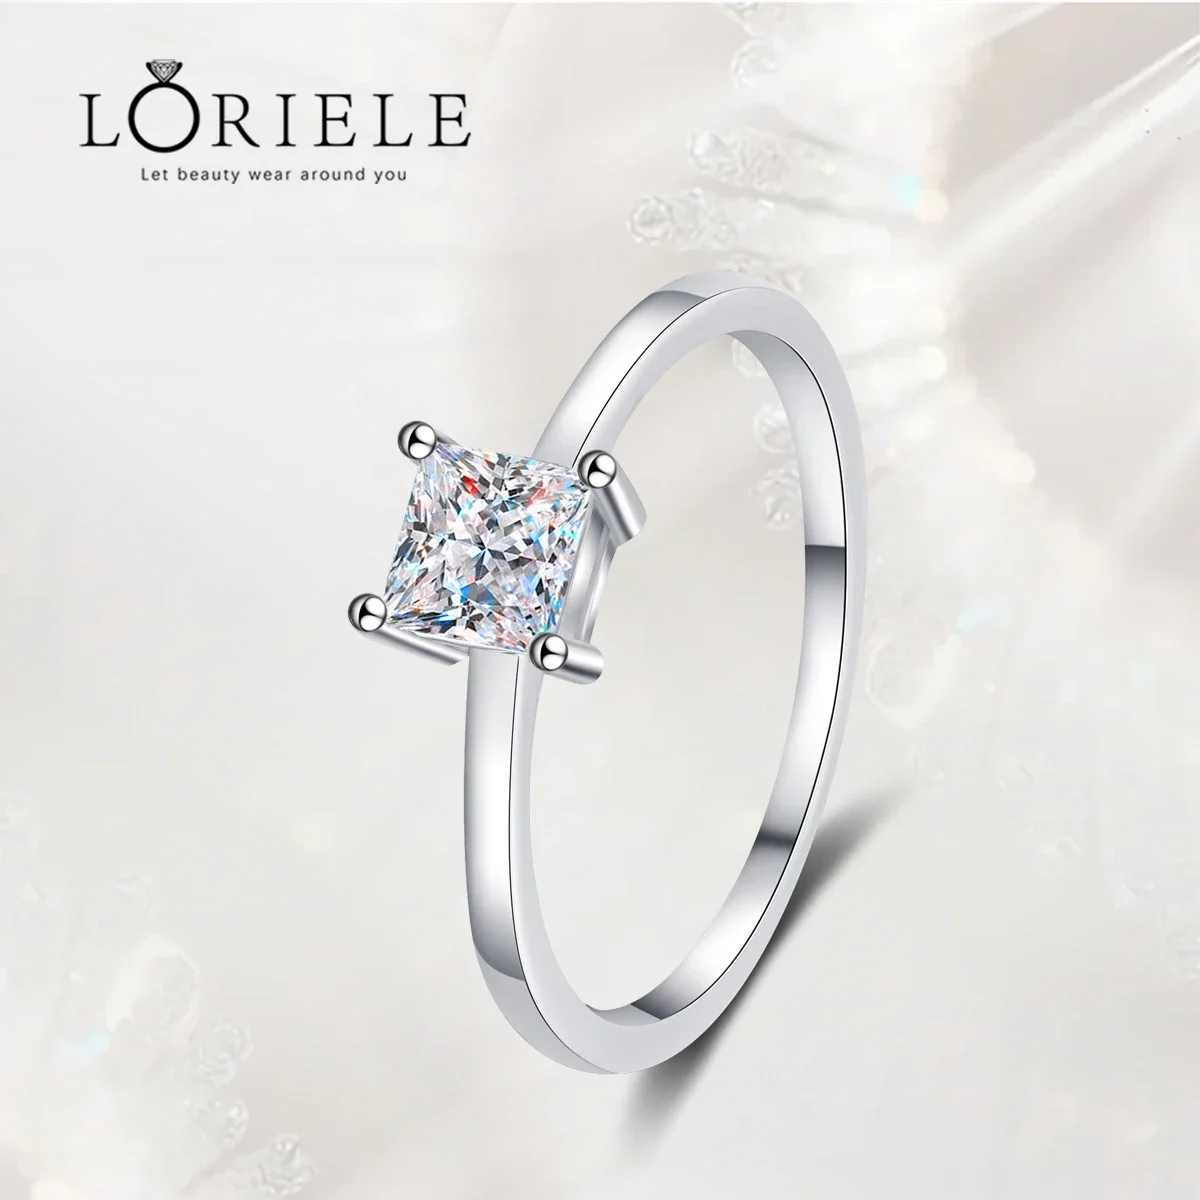 

LORIELE Princess Cut Moissanite Rings 0.6 Carat Anniversary Wedding Ring Box Promise Rings Stackable Eternity Bands for Women